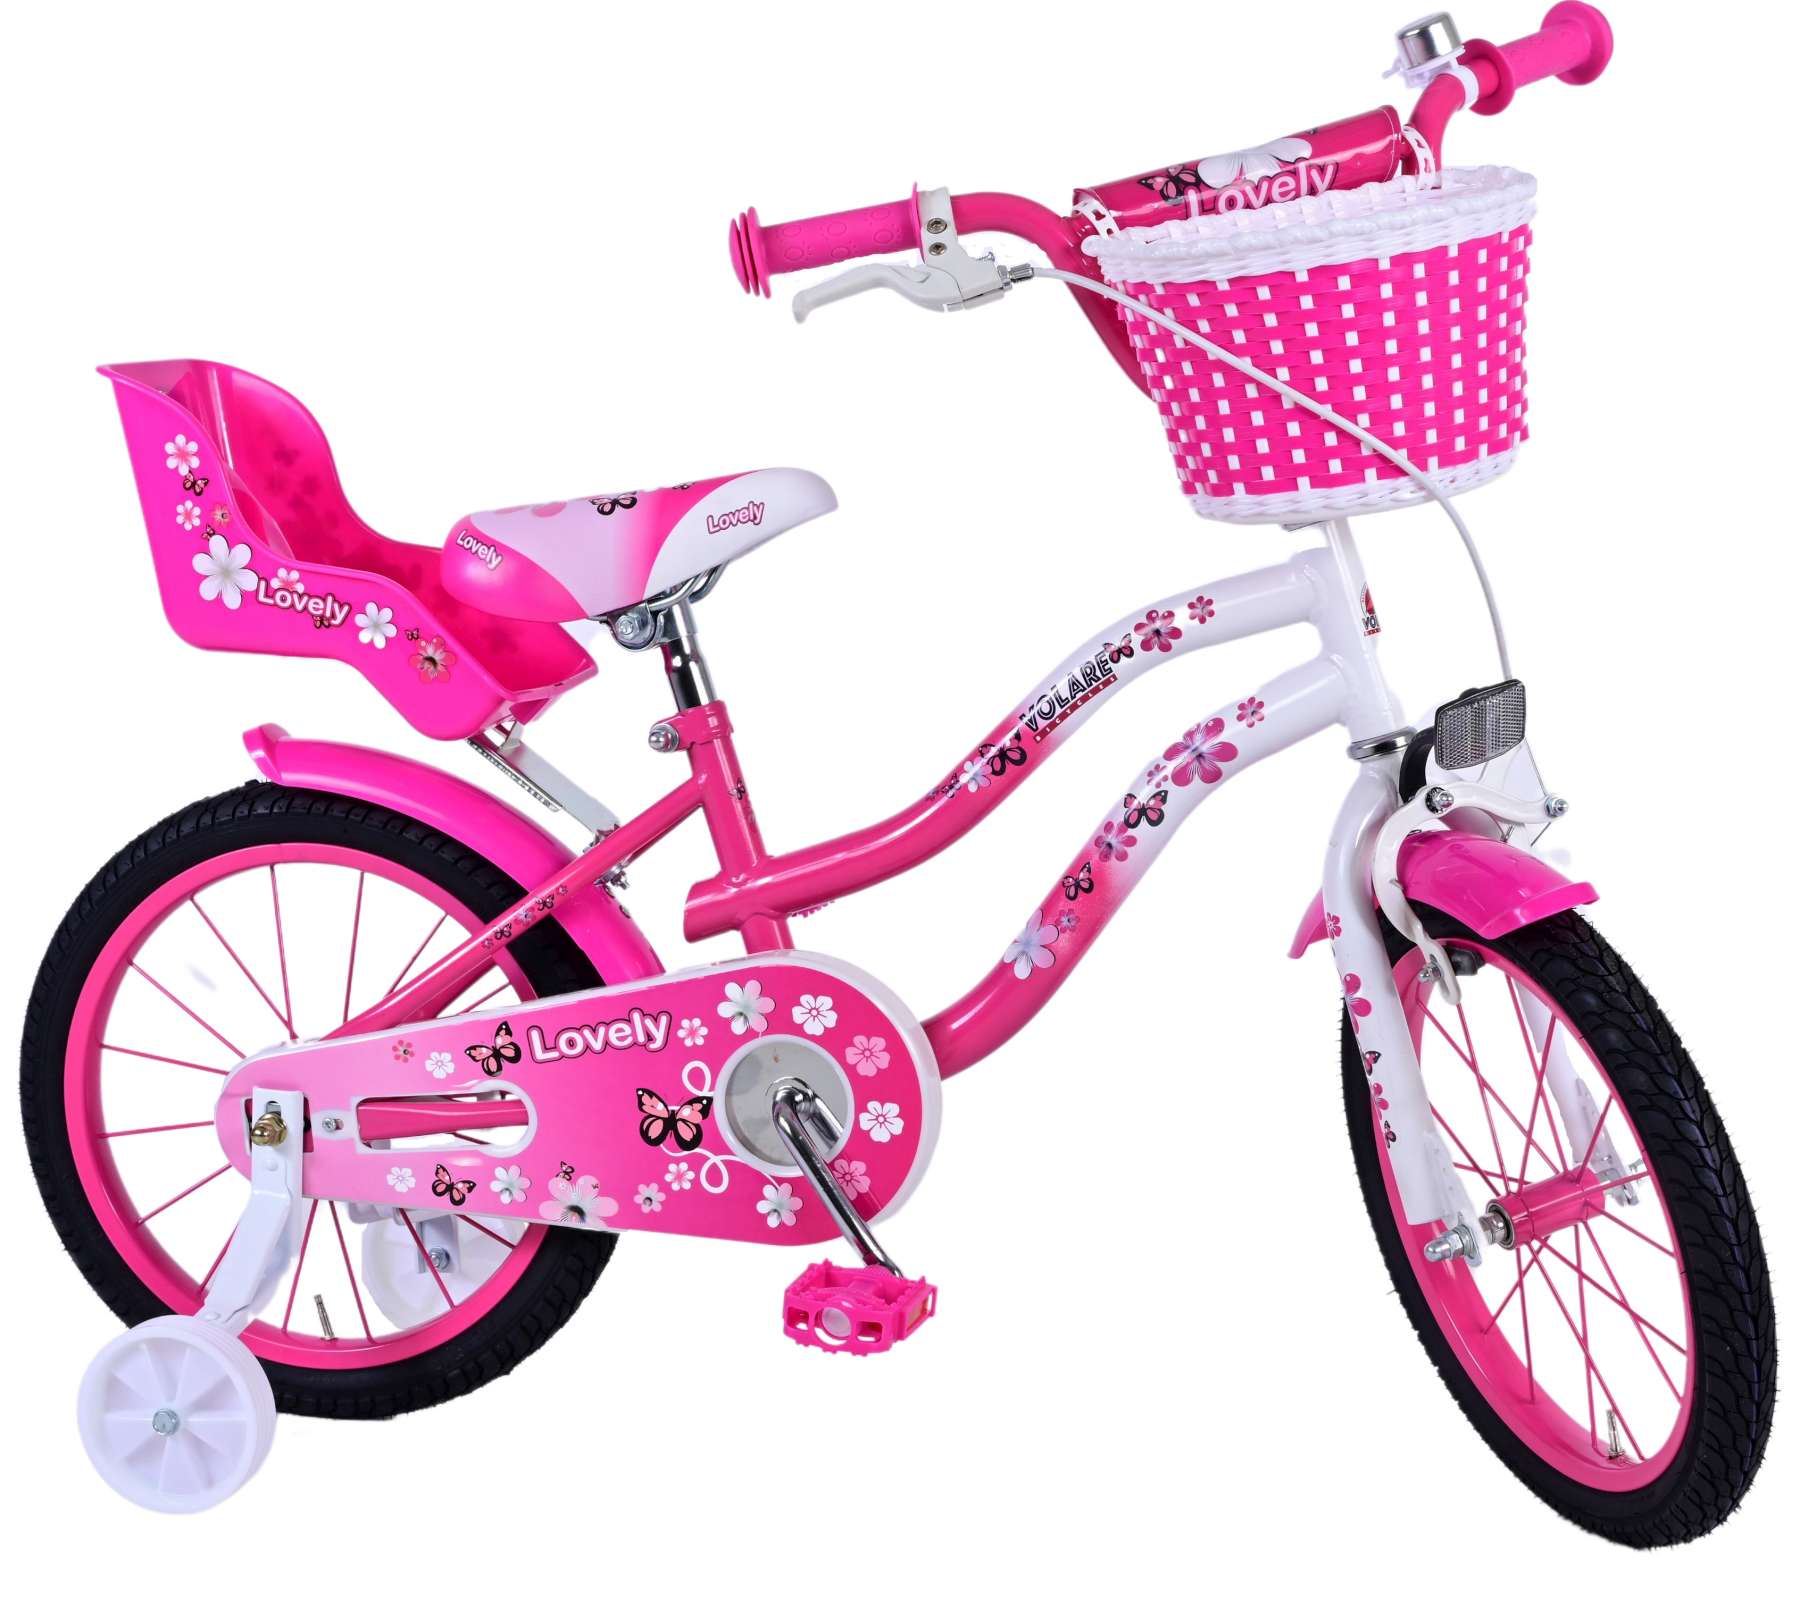 Volare_Lovely_kinderfiets_16_inch_-_1-W1800